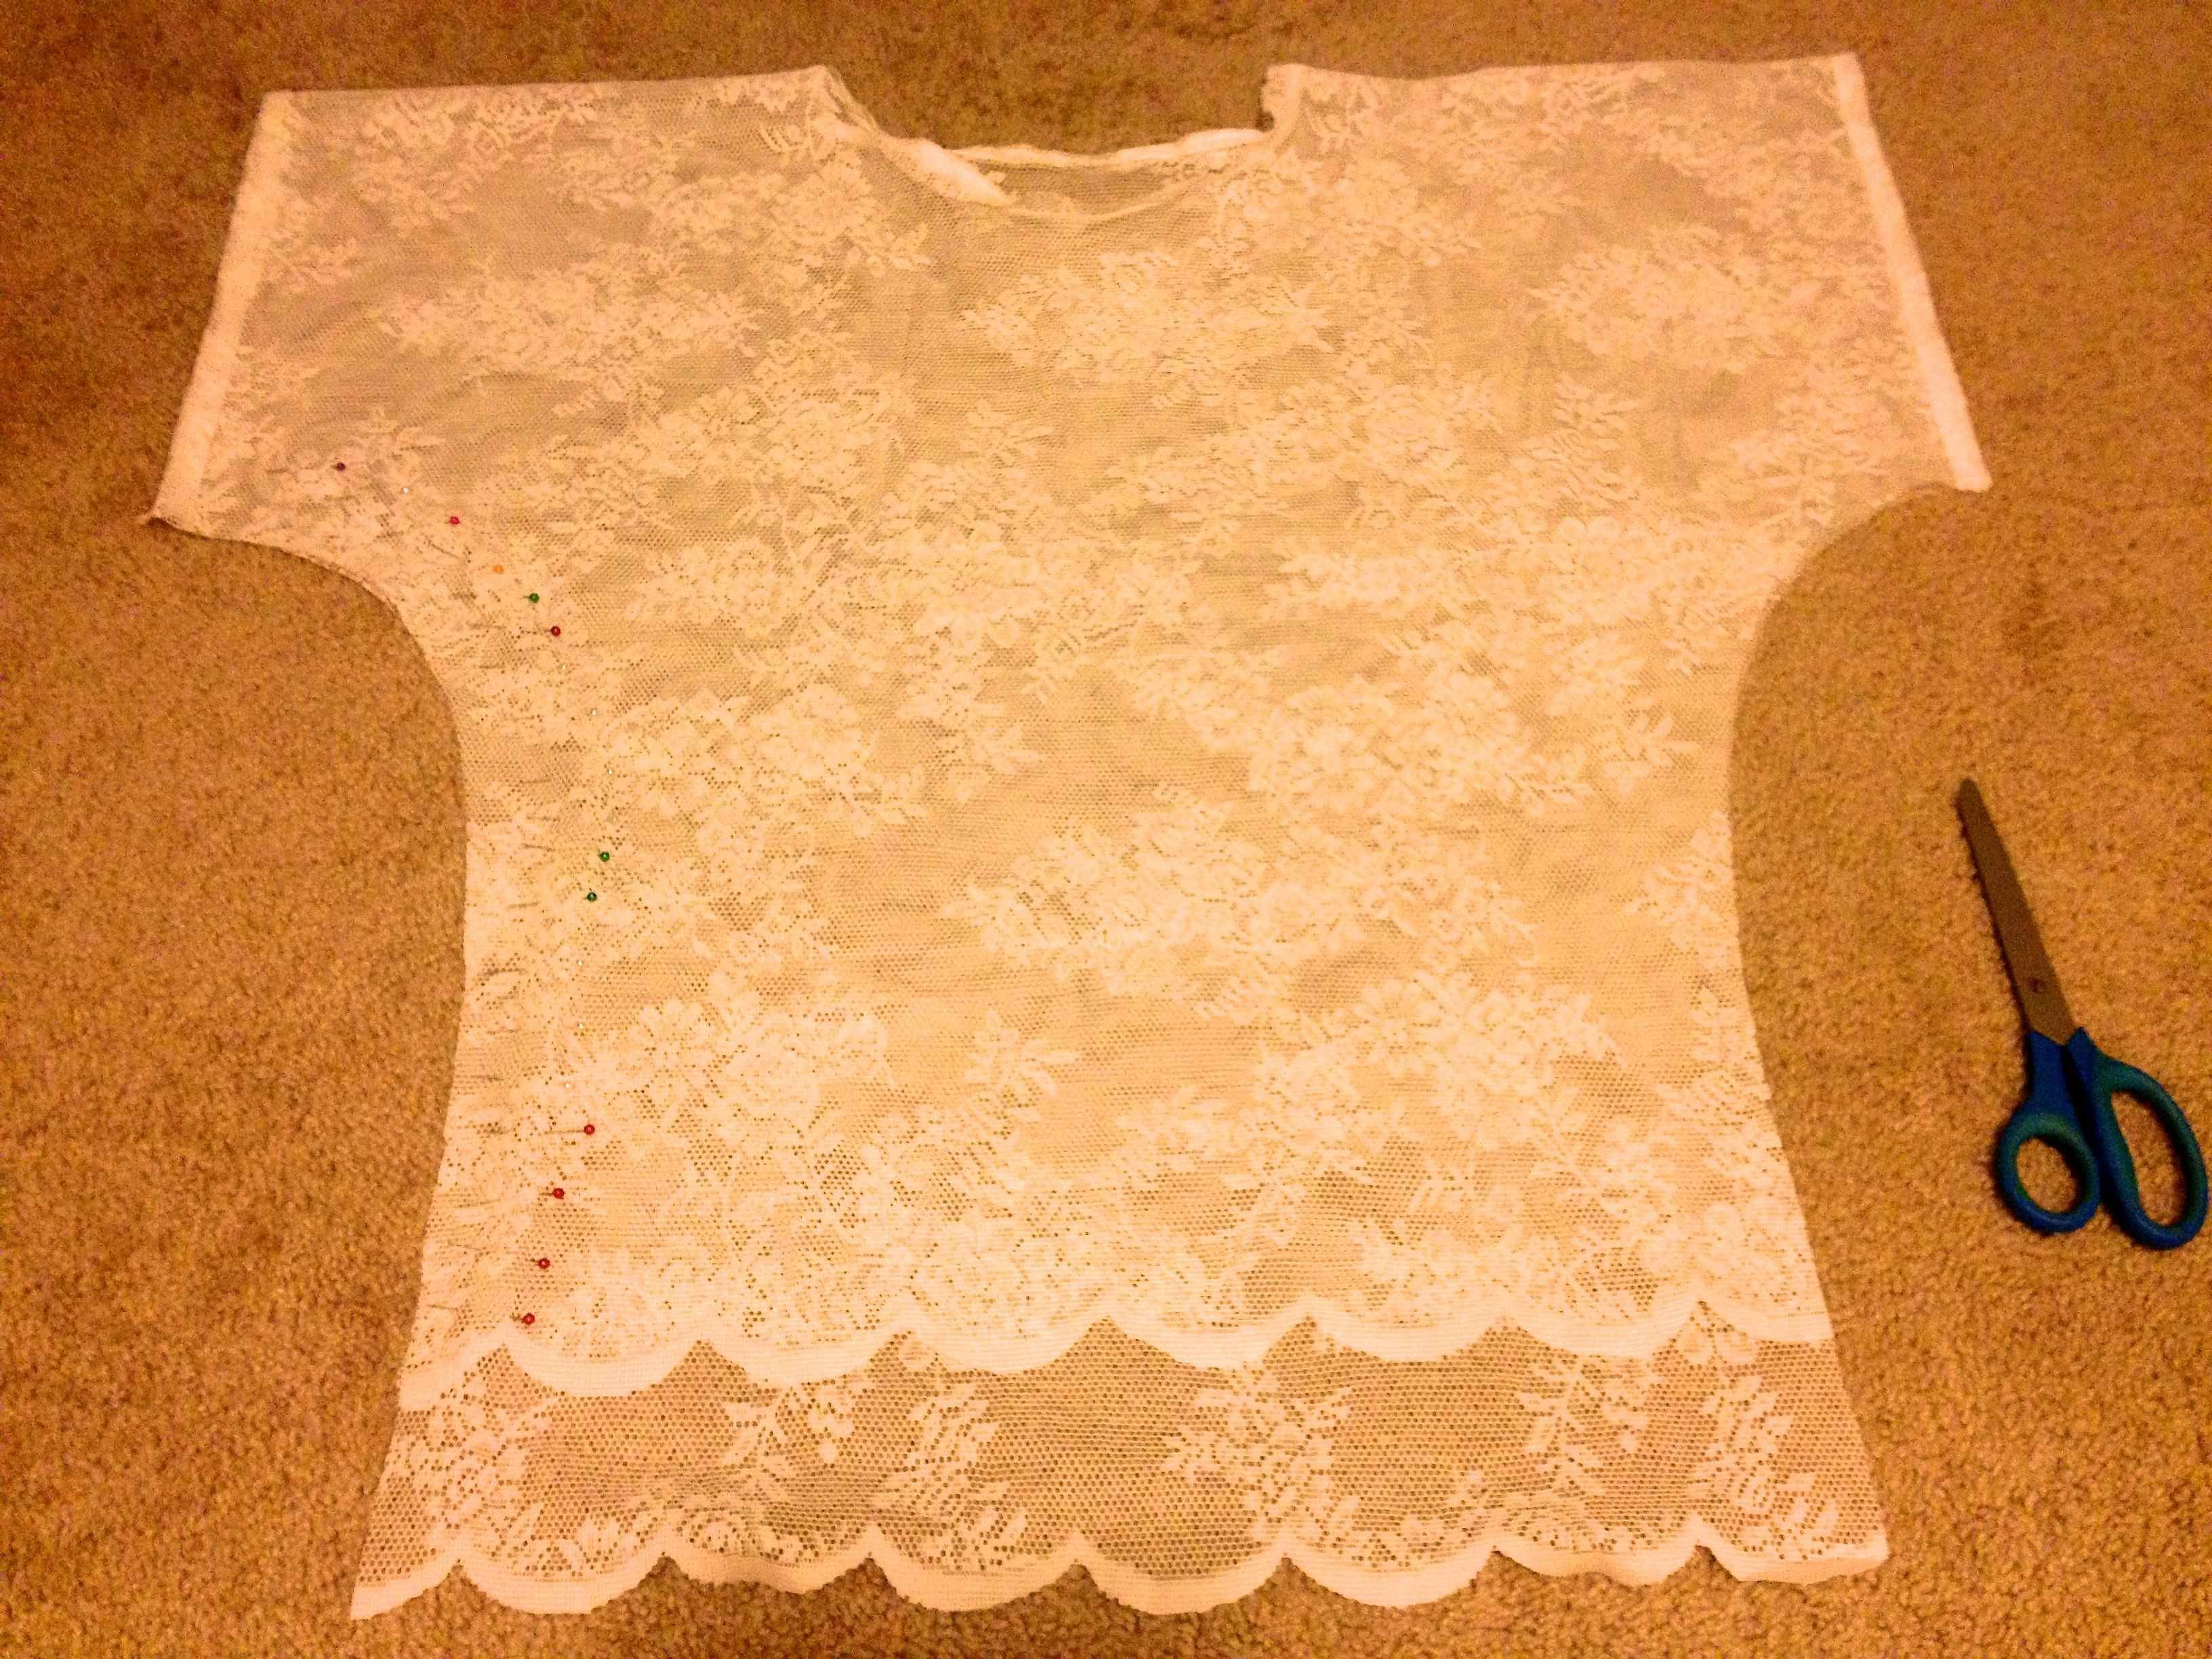 Swim Suit Cover Up from Lace Curtain  (Scroll down)